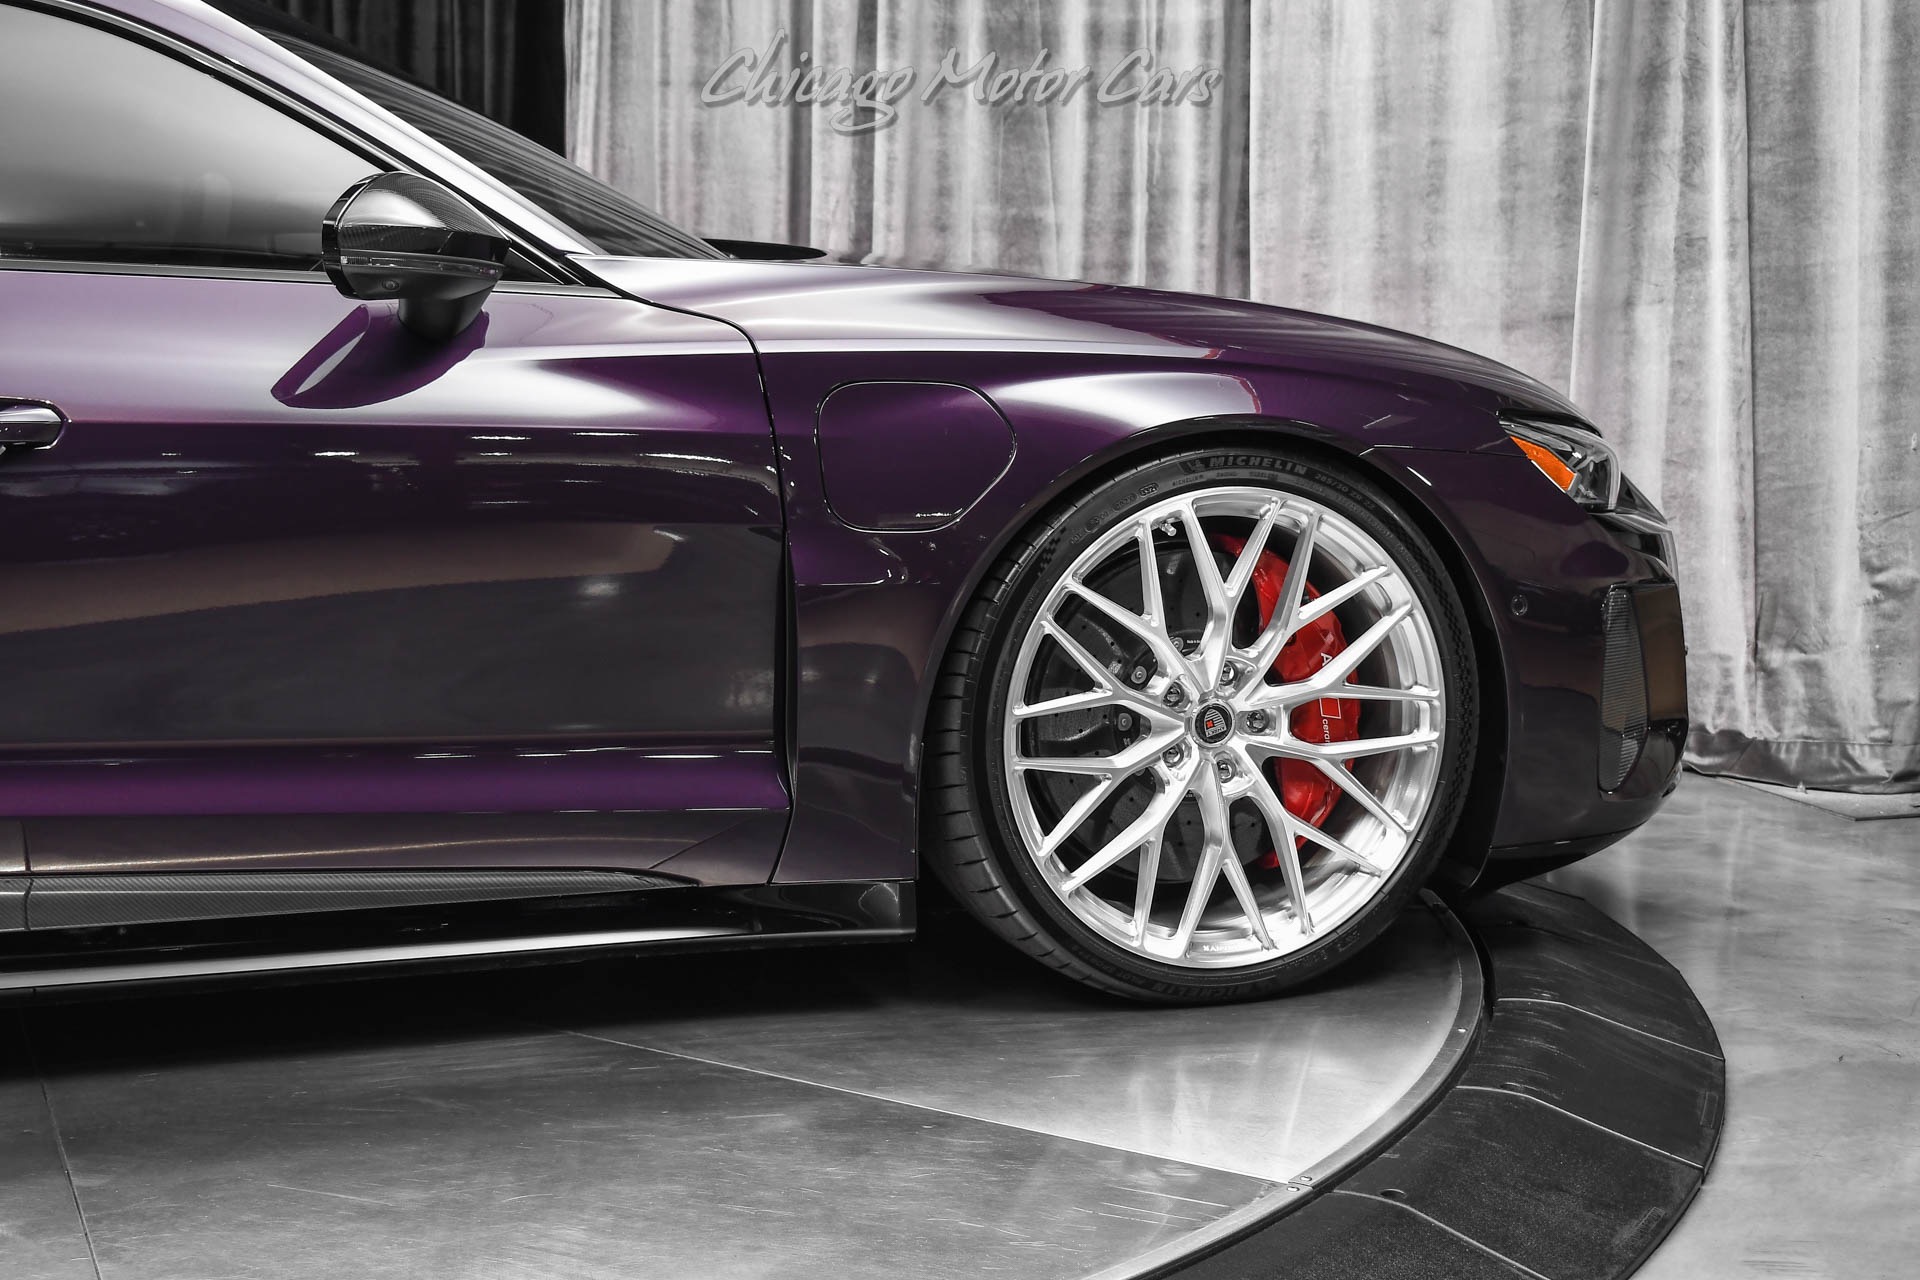 Used-2022-Audi-RS-e-tron-GT-quattro-ANRKY-Wheels-Upgrades-Lowered-RARE-Audi-Exclusive-Merlin-Purple